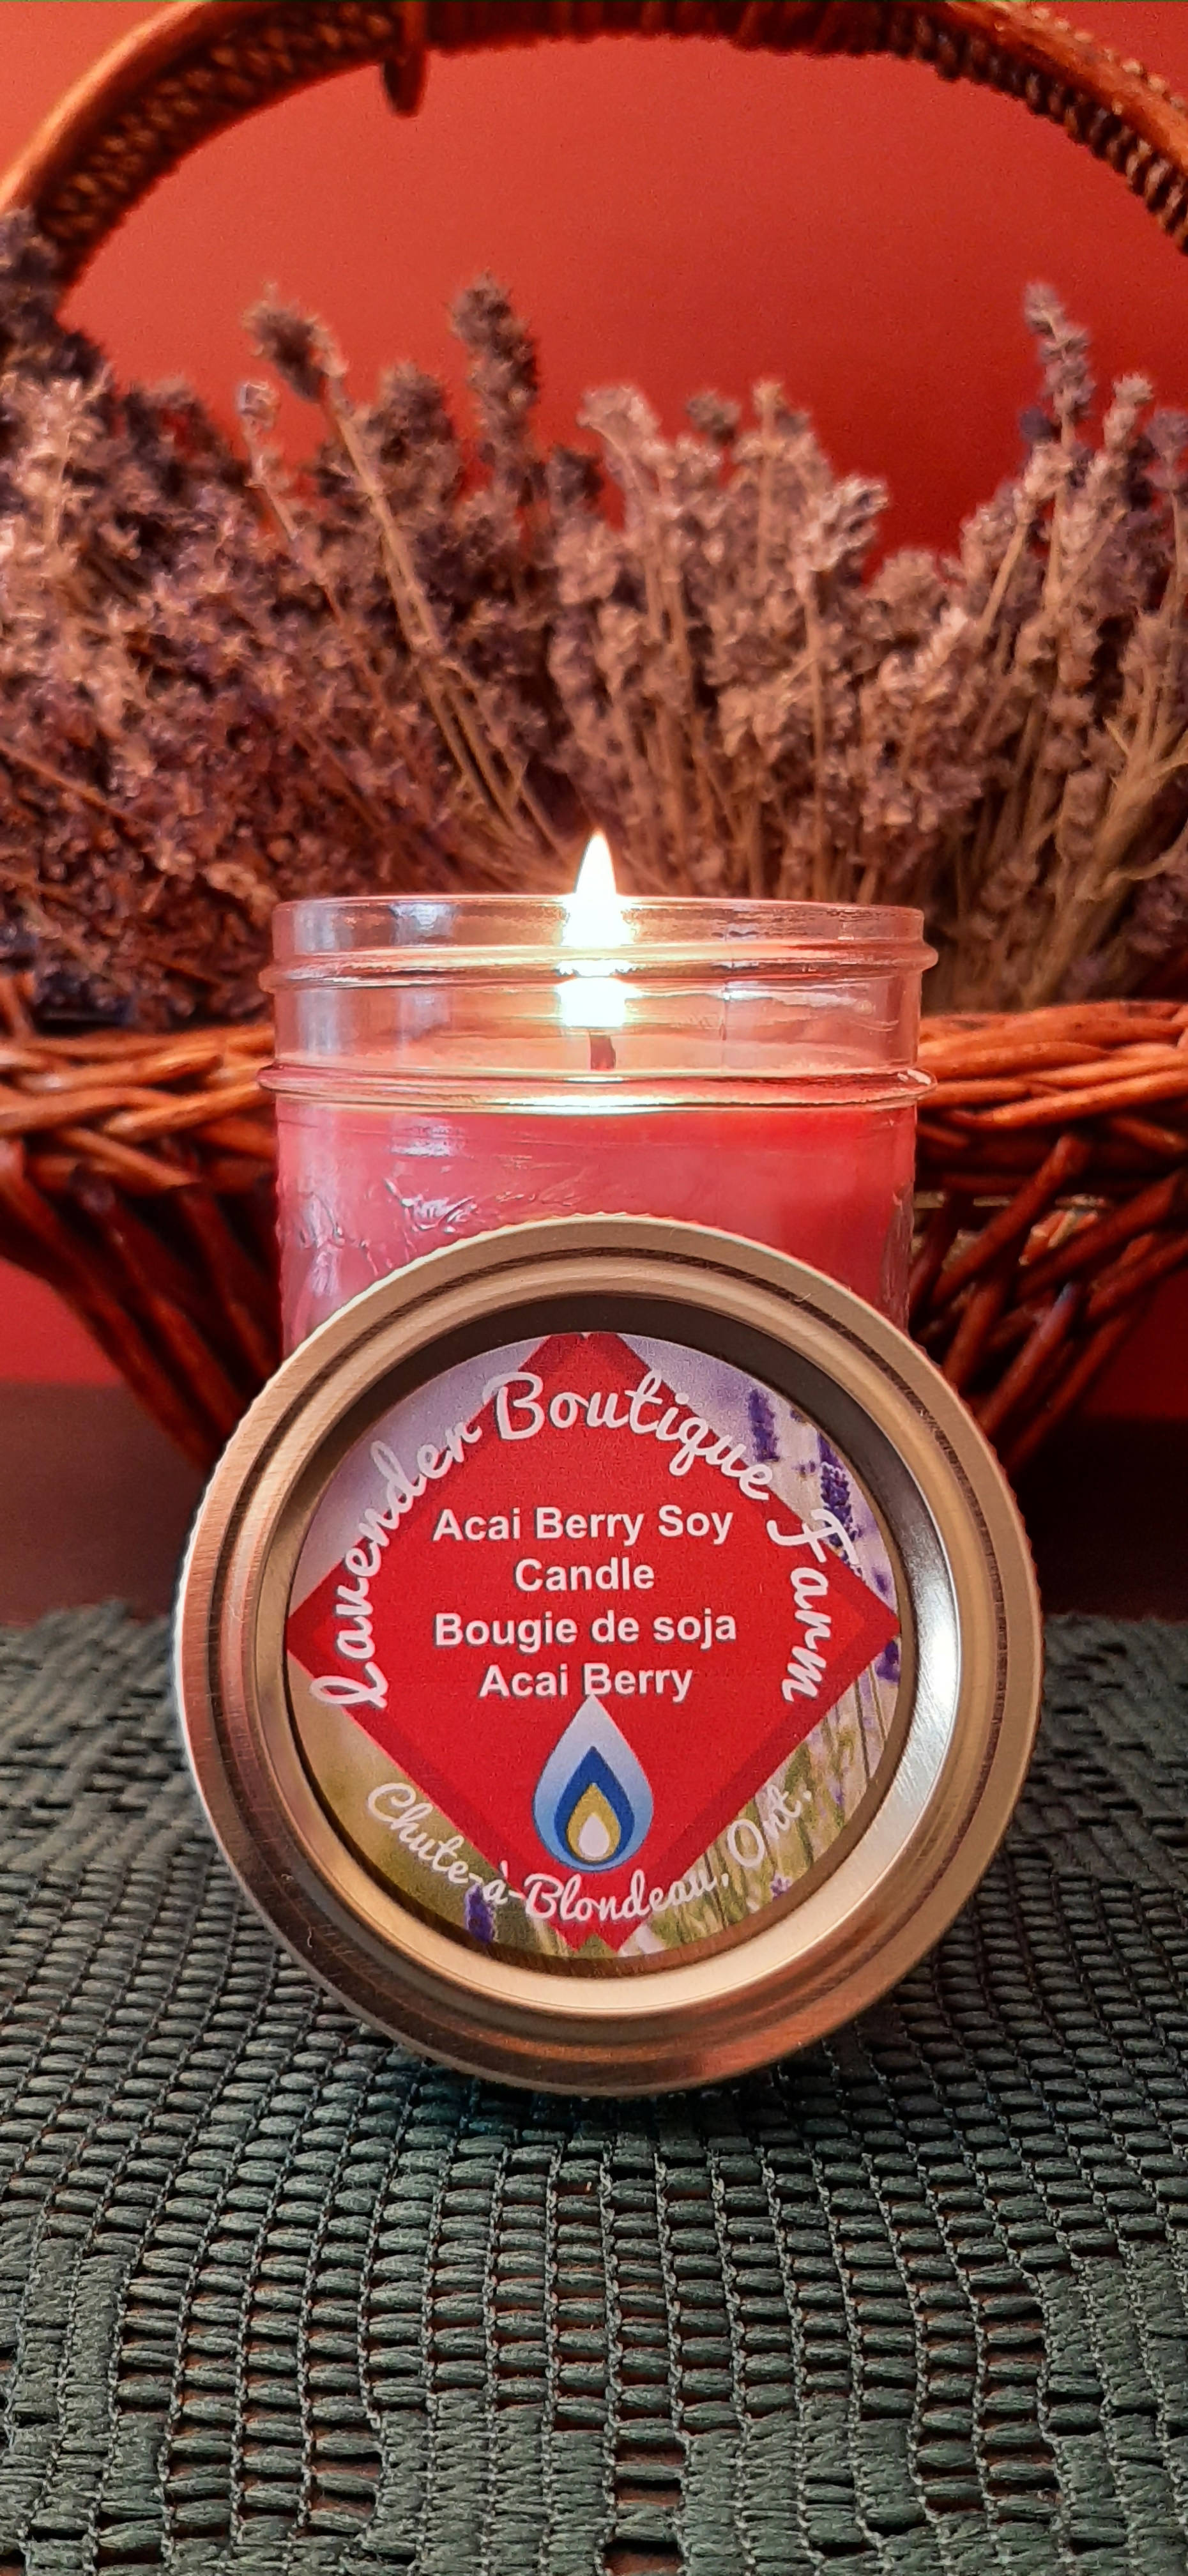 Acai Berry soy candle